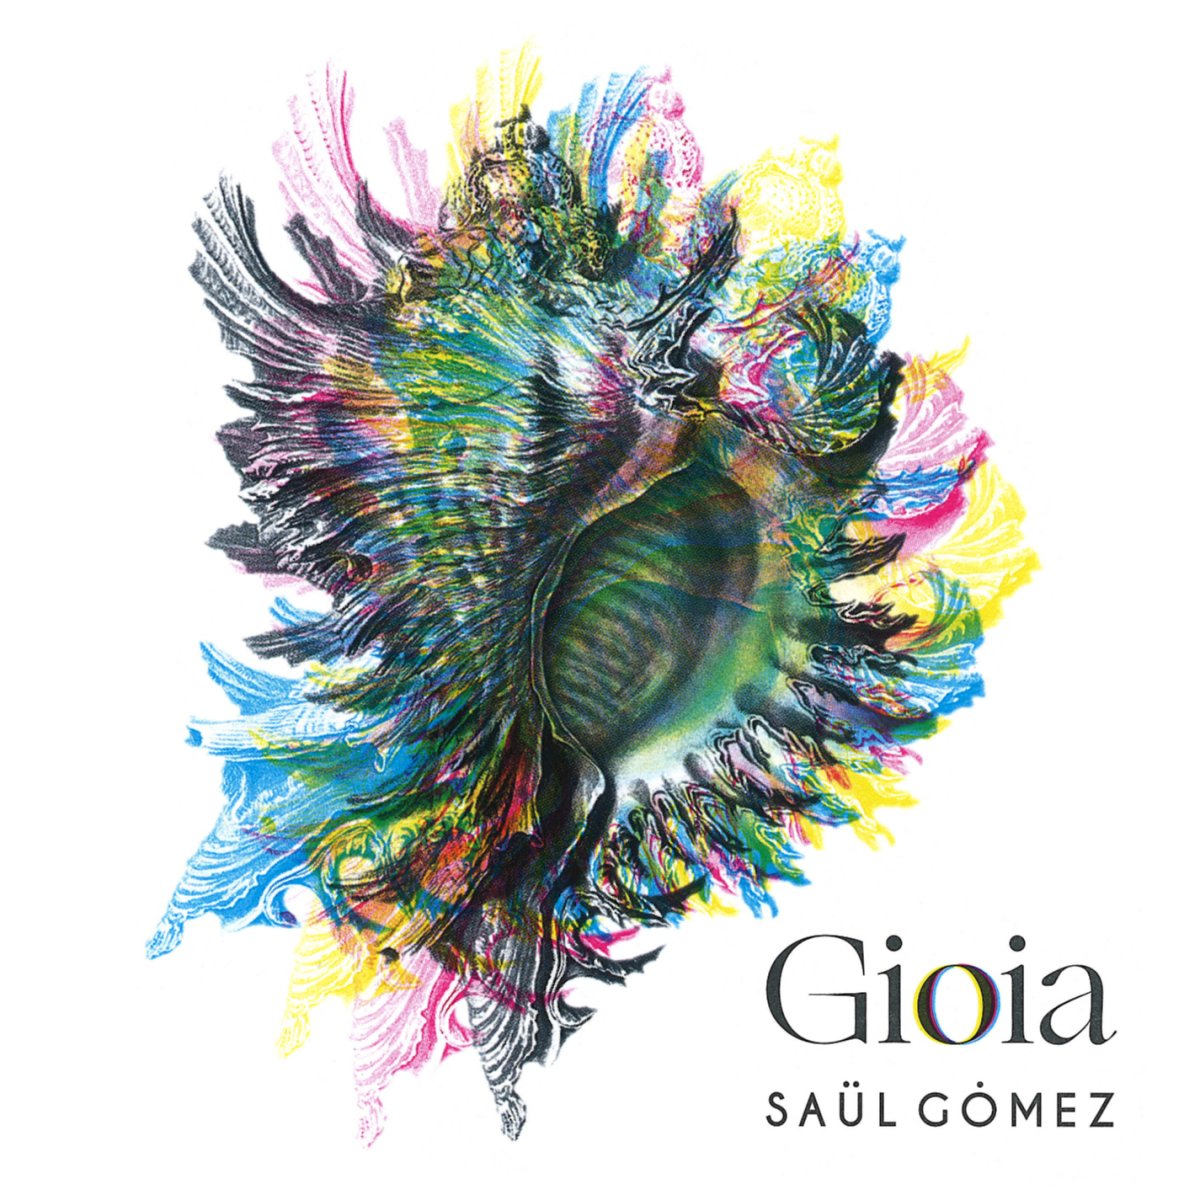 Gioia (New Compositions by Sal Gmez Soler) - cliquer ici